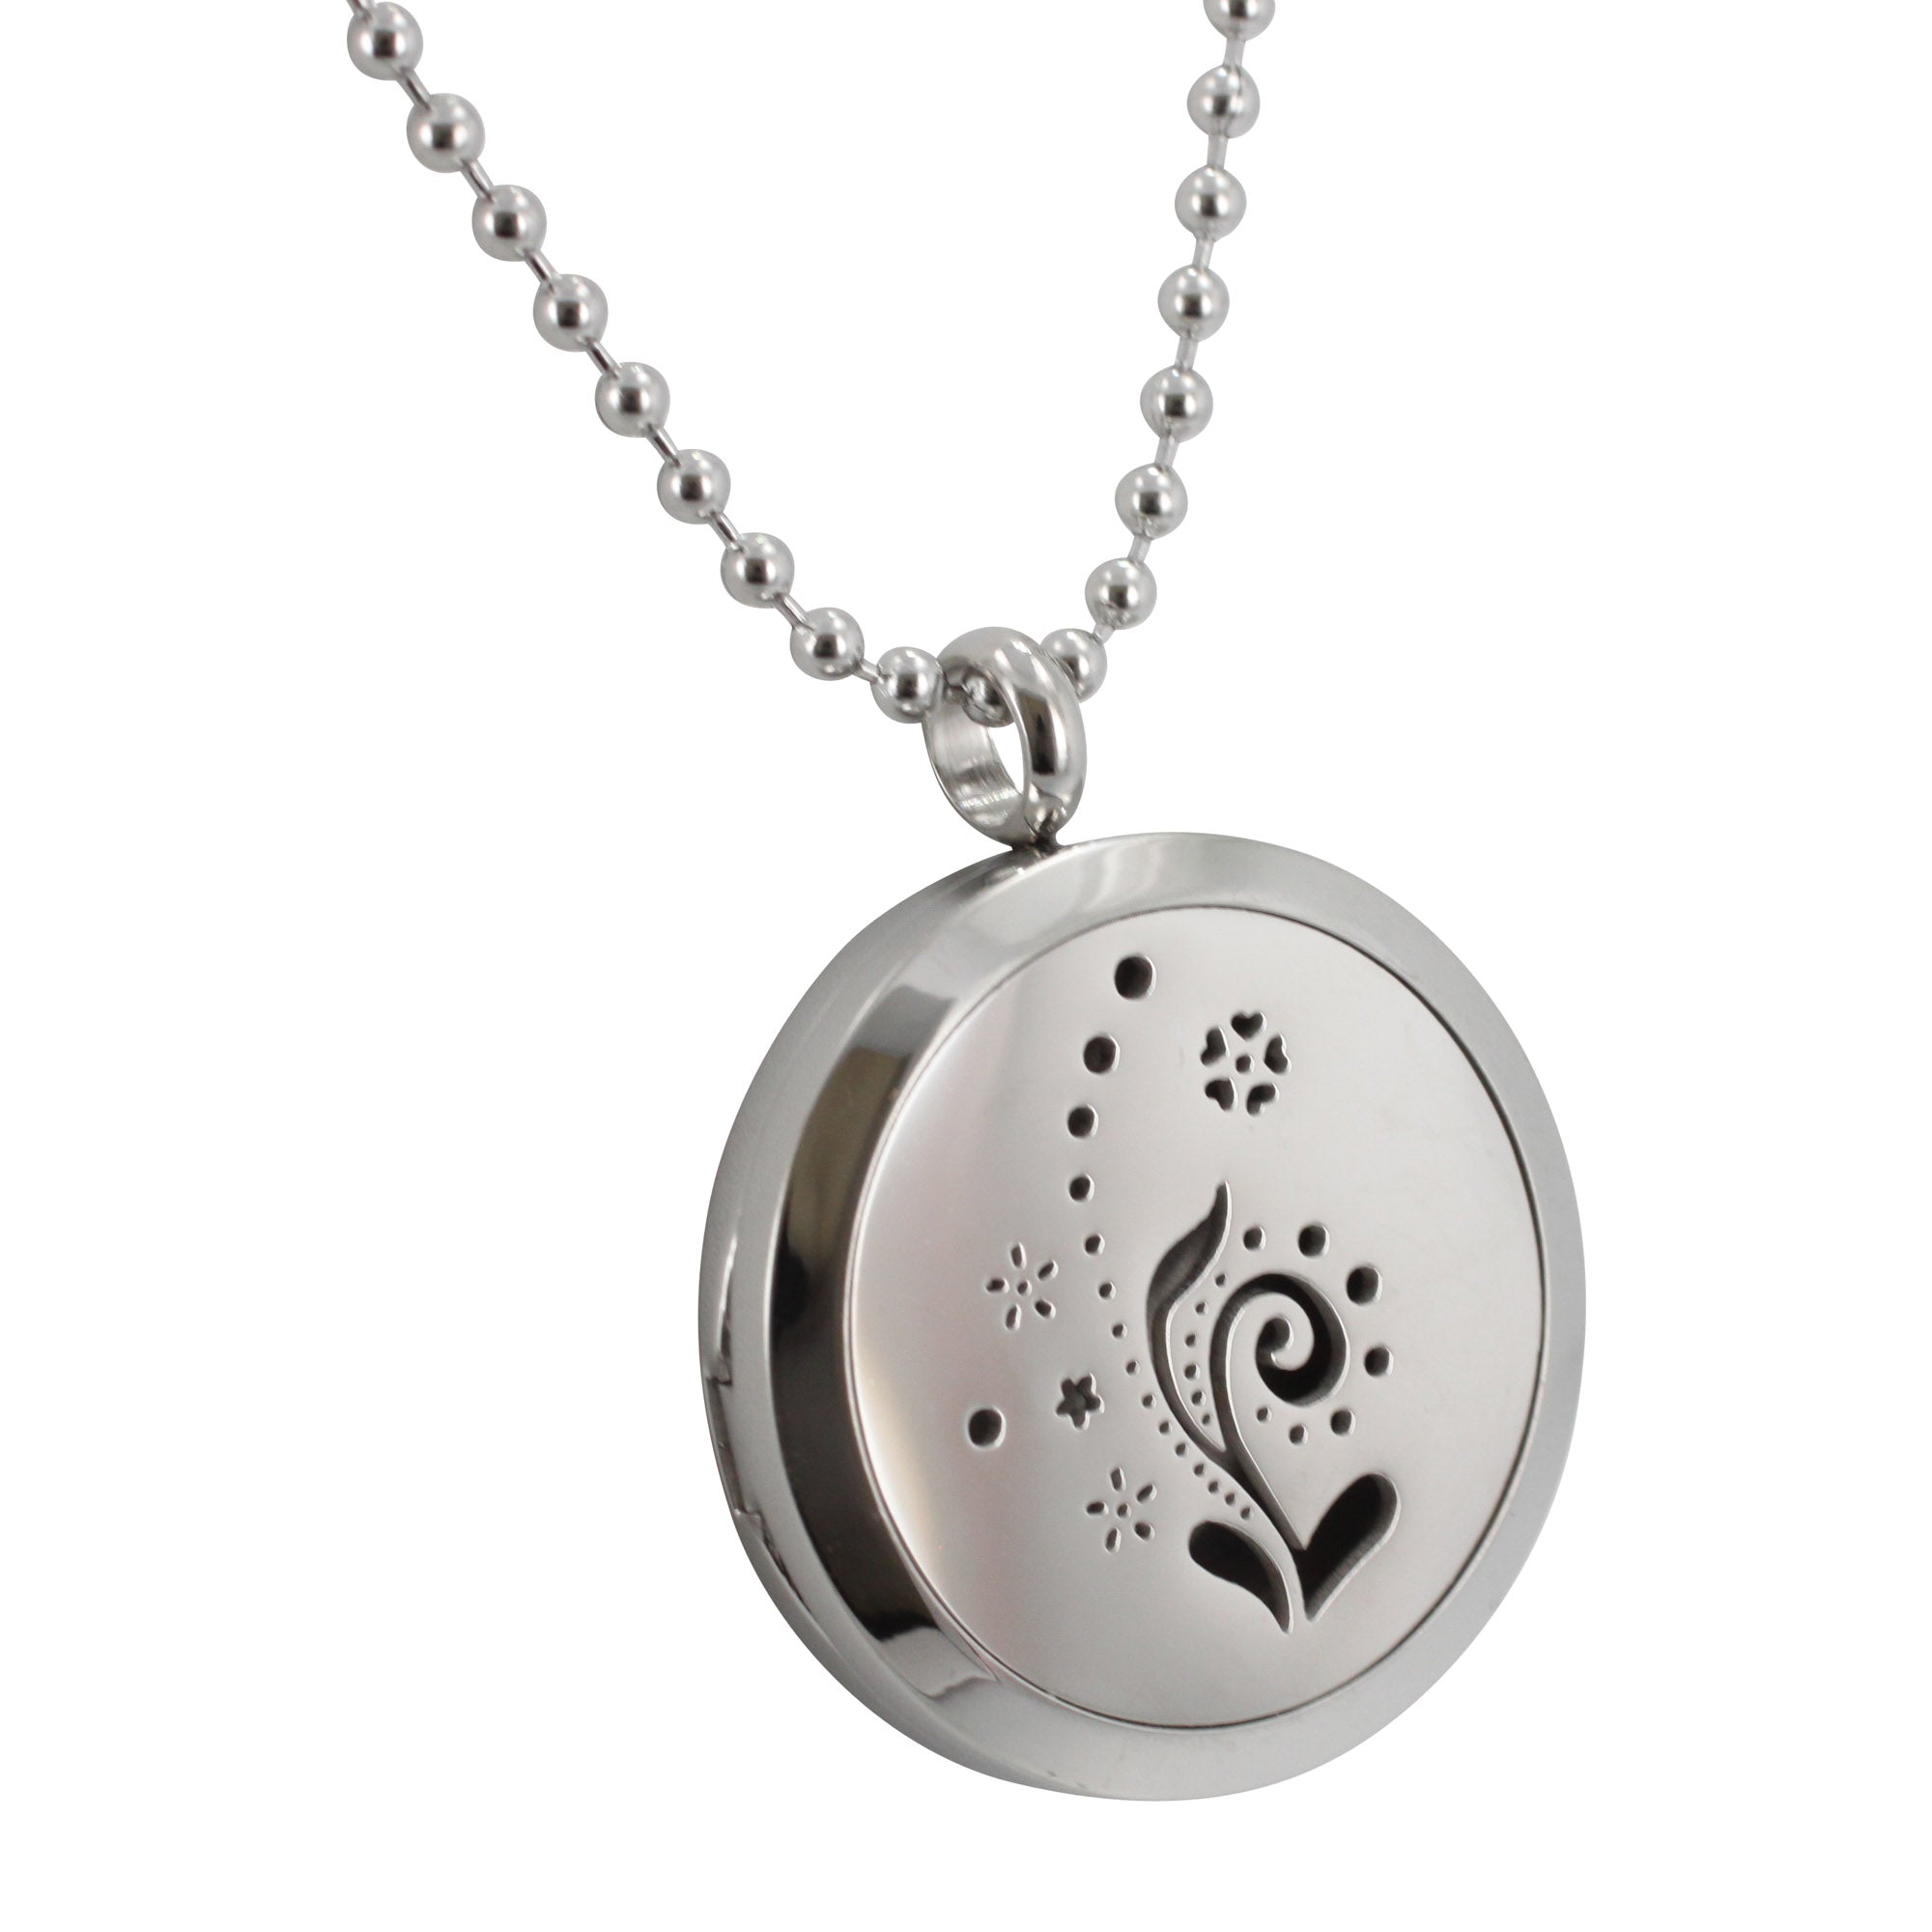 Flower Aromatherapy Essential Oil Diffuser Locket Necklace or Car